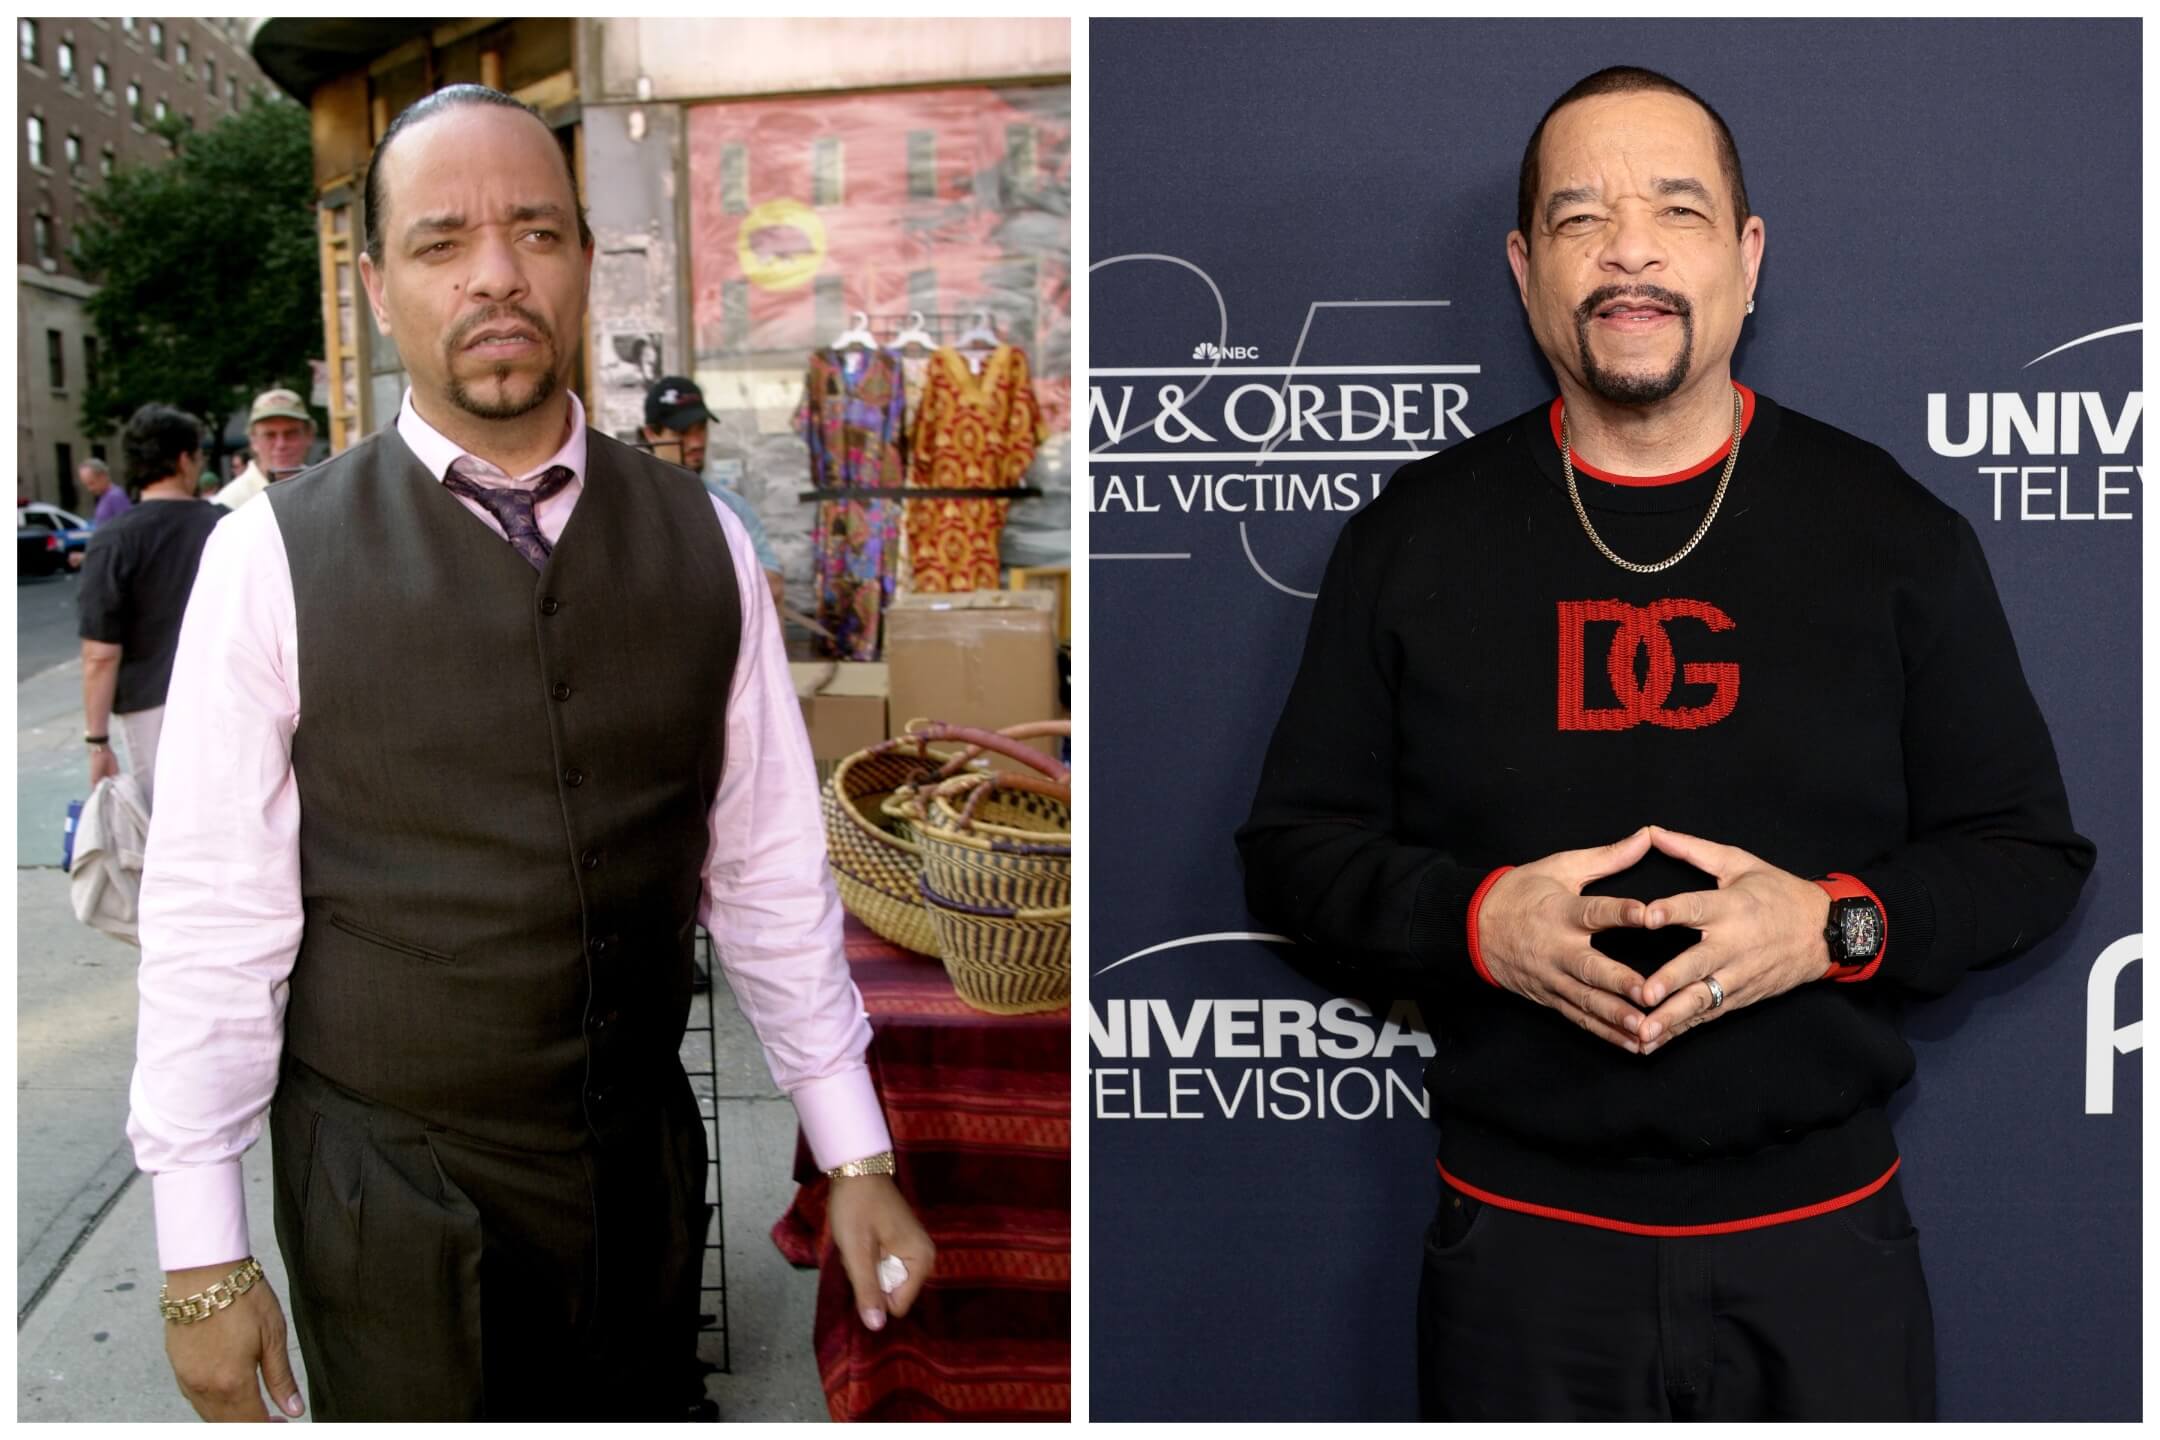 'Law & Order: SVU' actor Ice-T